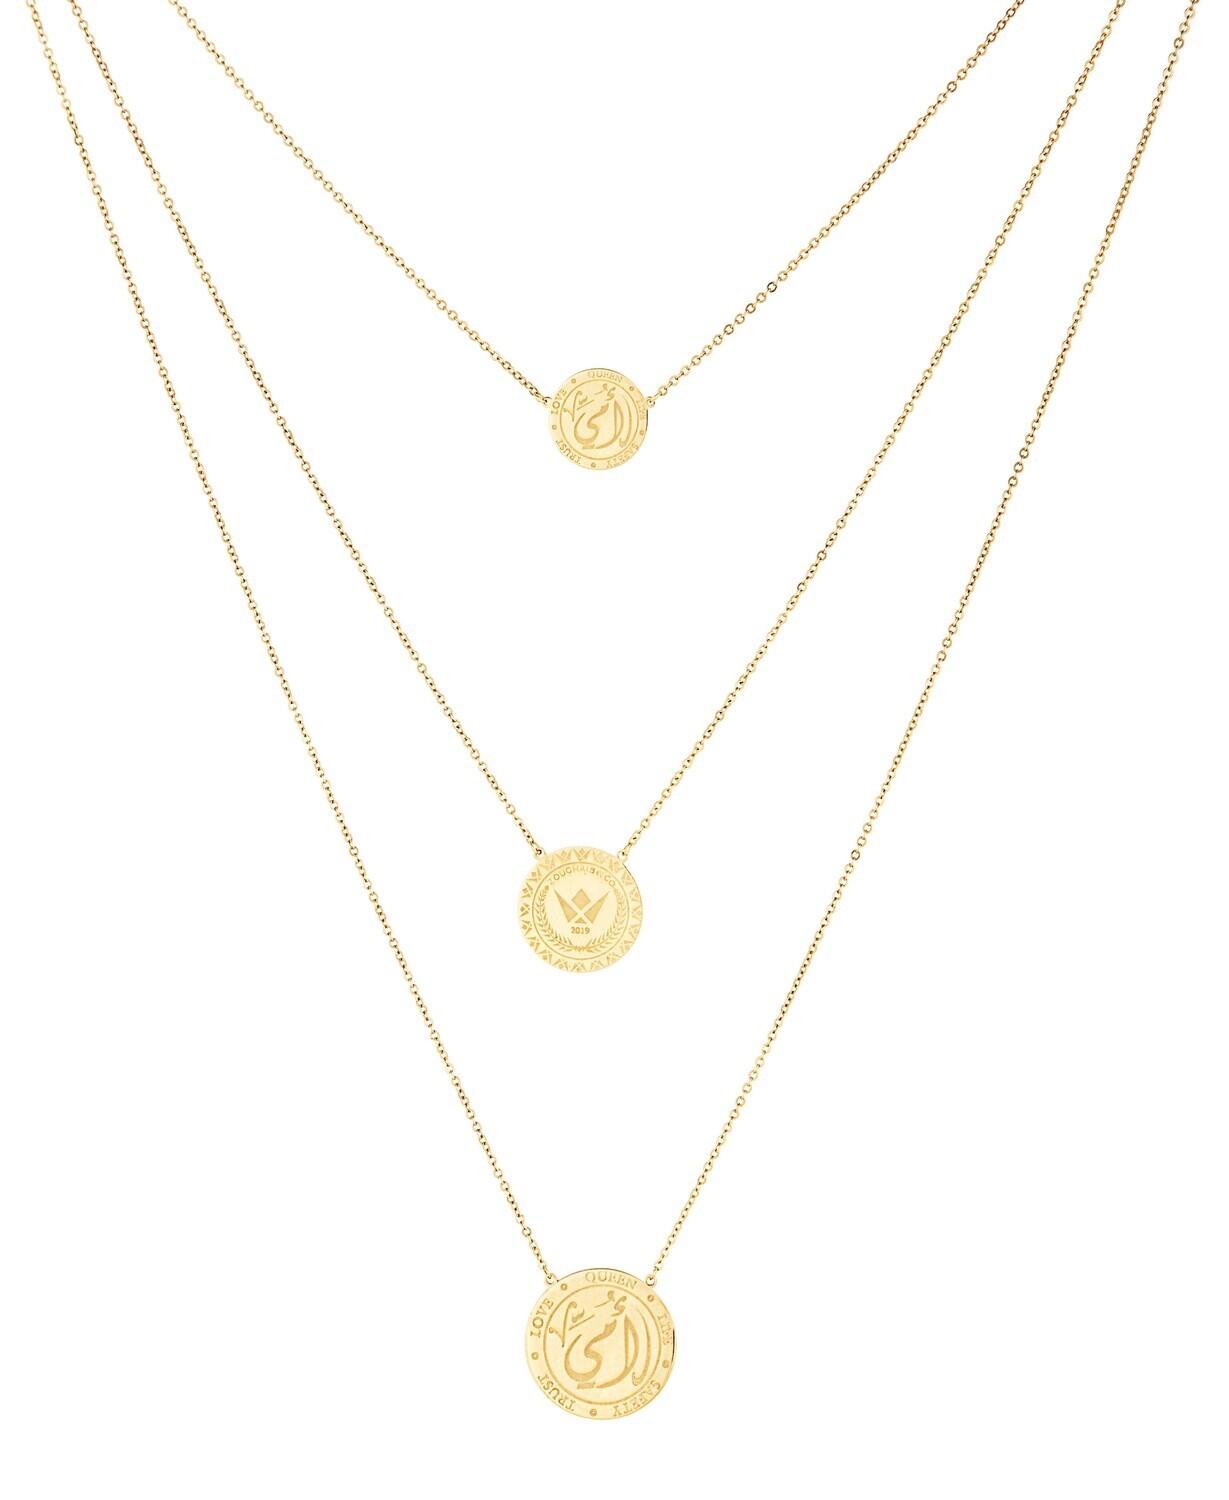 Tribute Gold Necklace